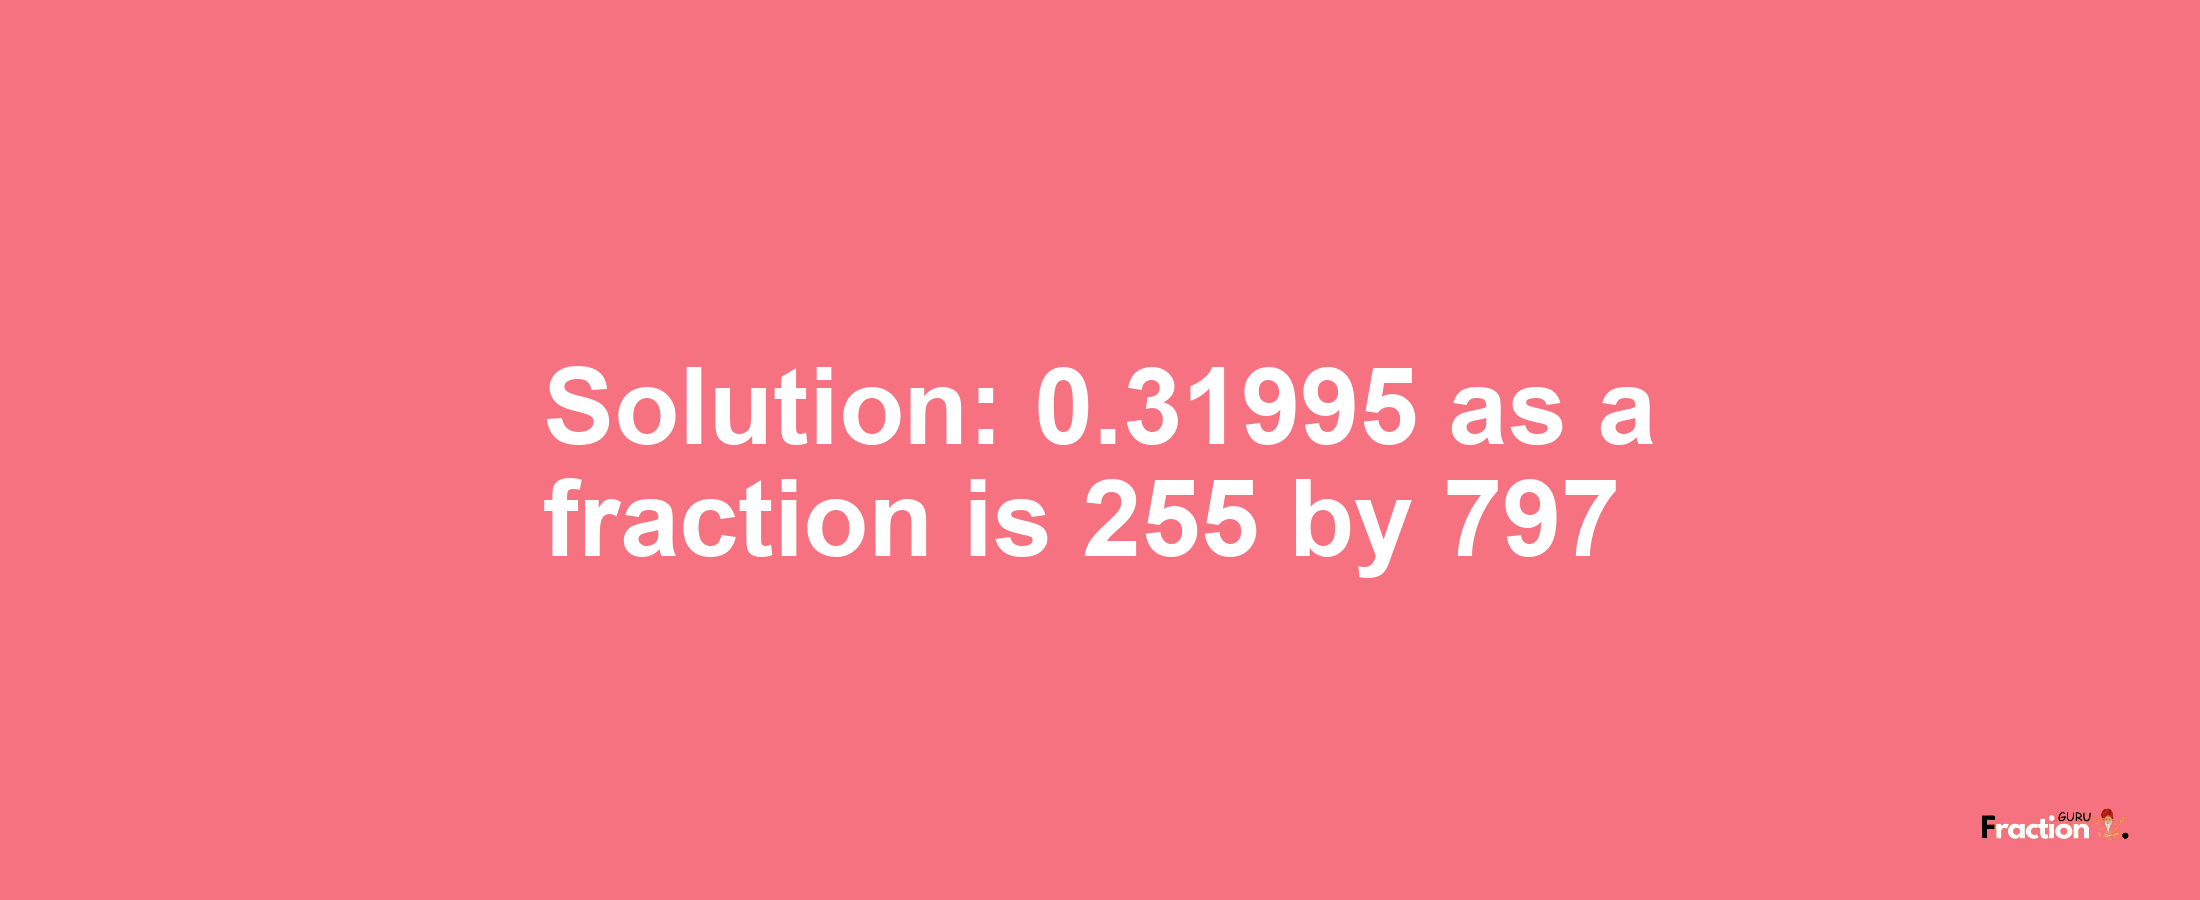 Solution:0.31995 as a fraction is 255/797